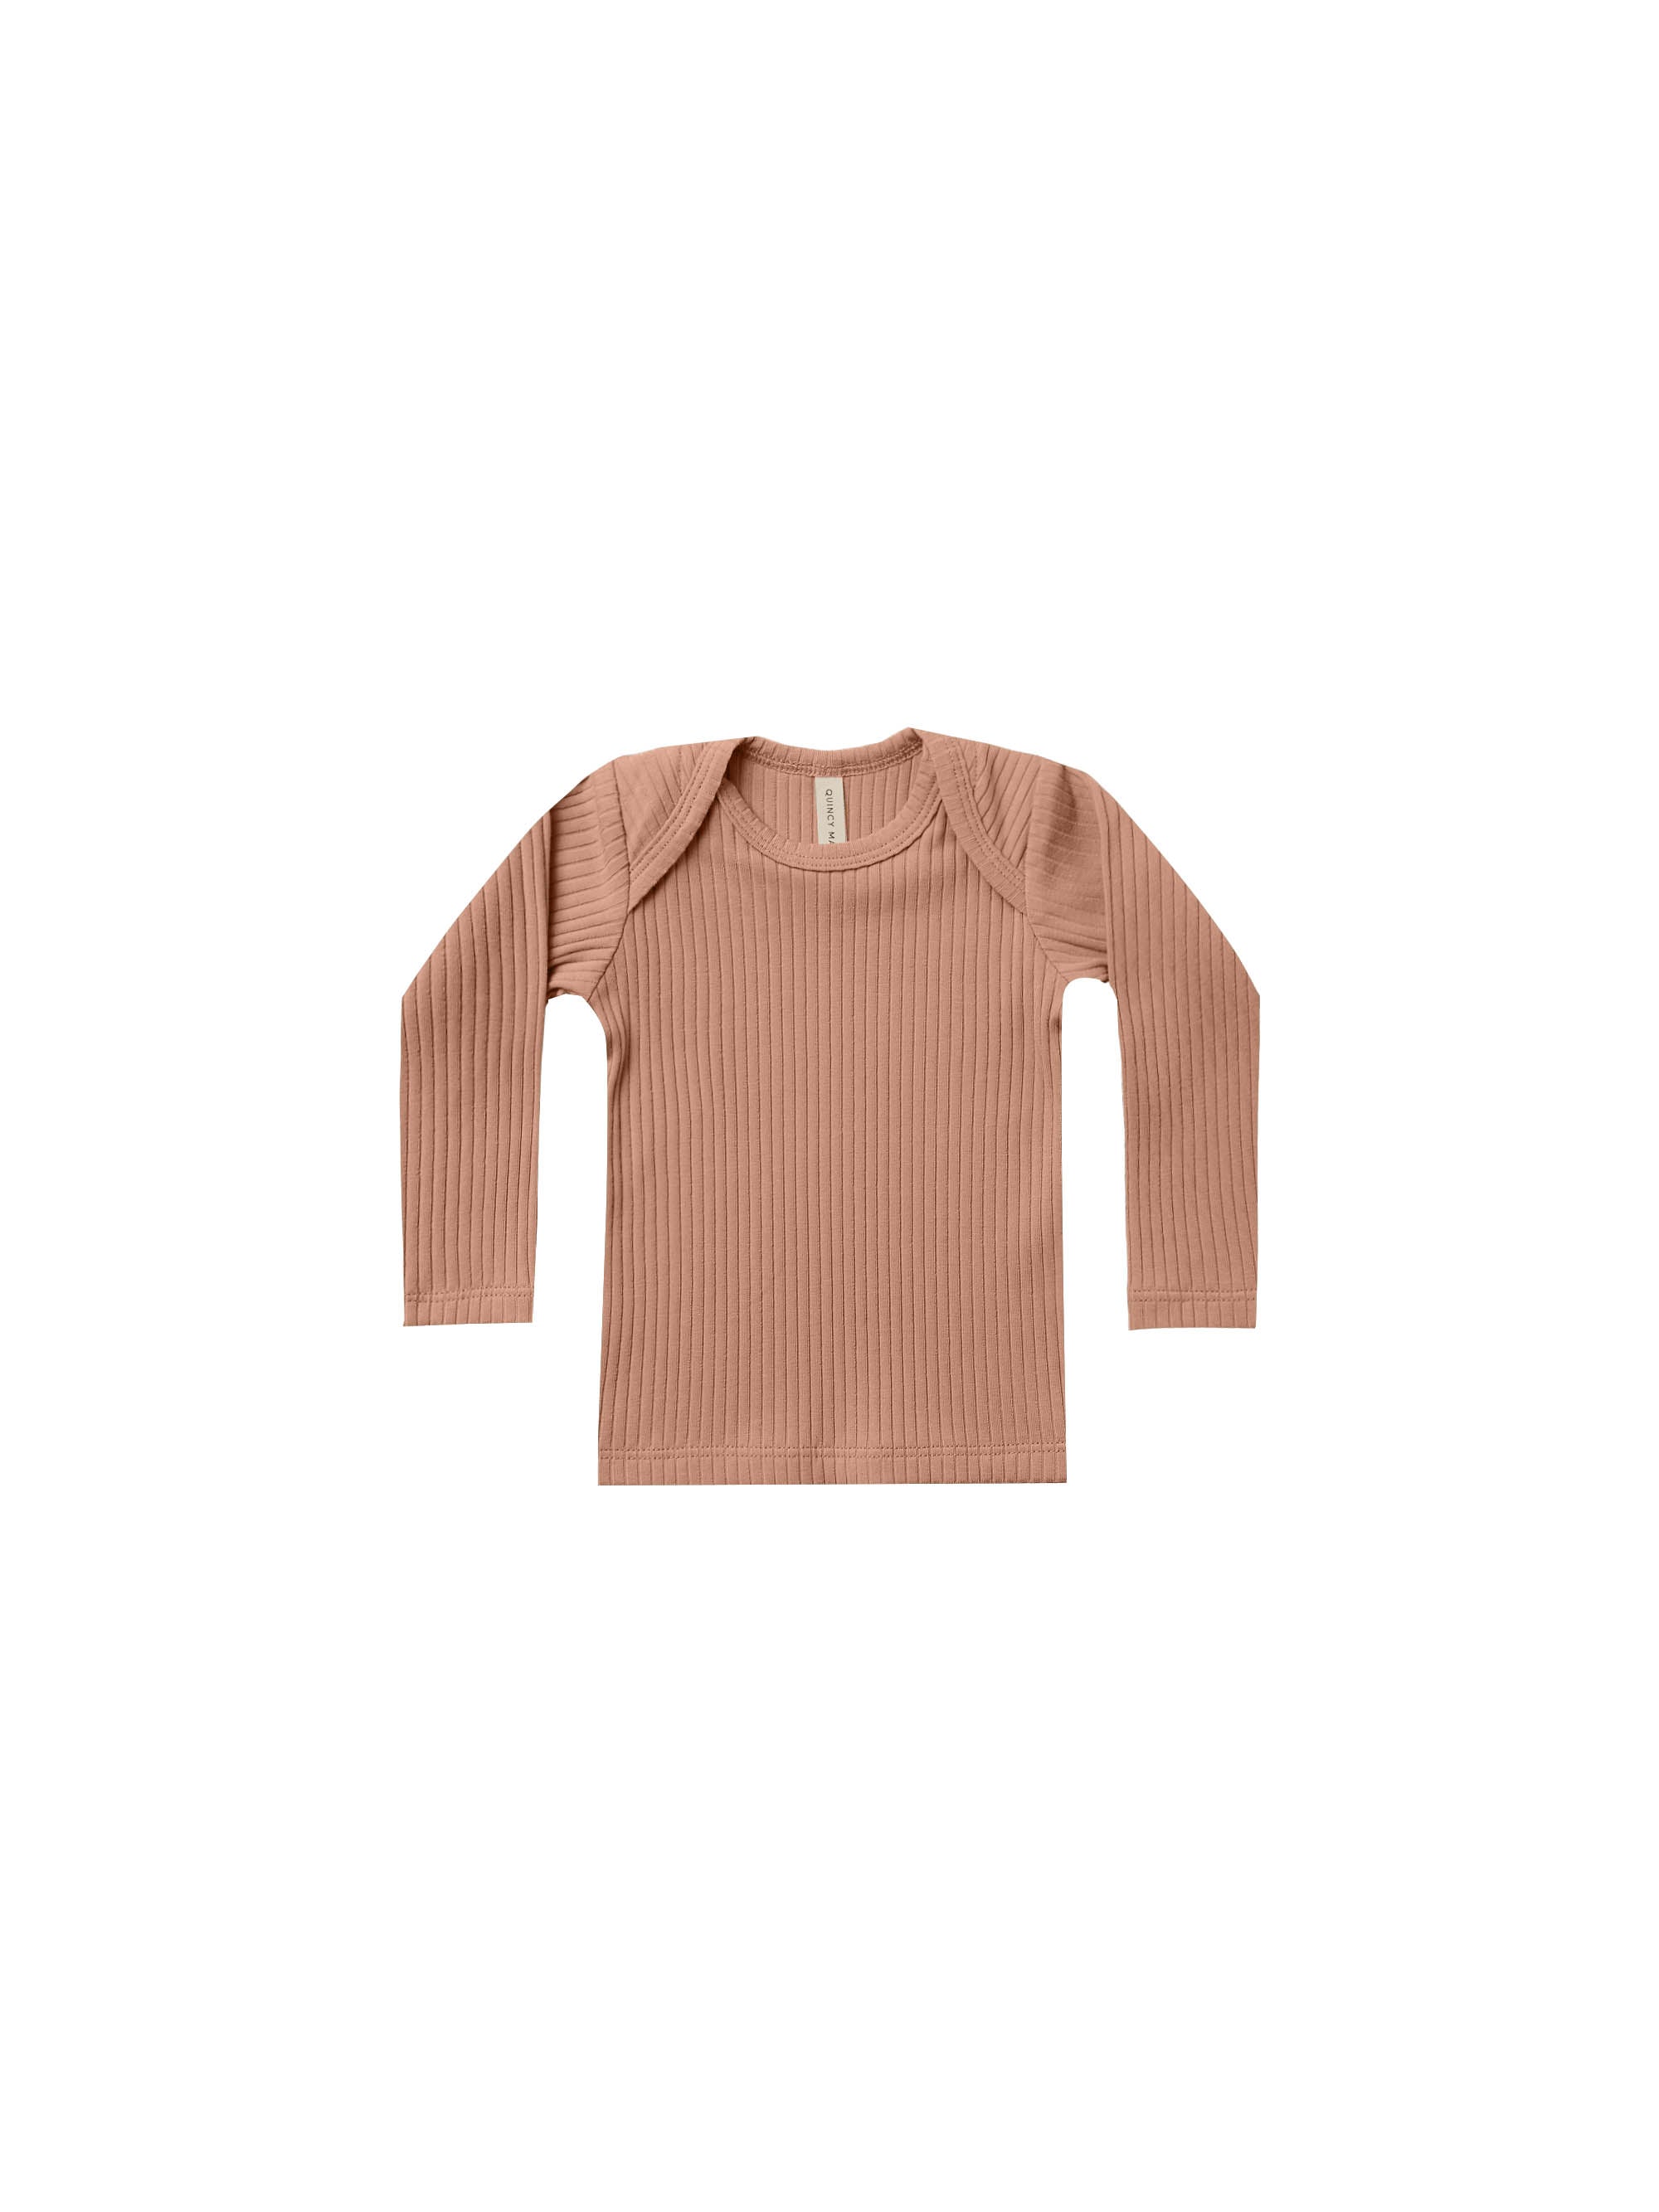 QUINCY MAE RIBBED LS LAP TEE / TERRACOTTA